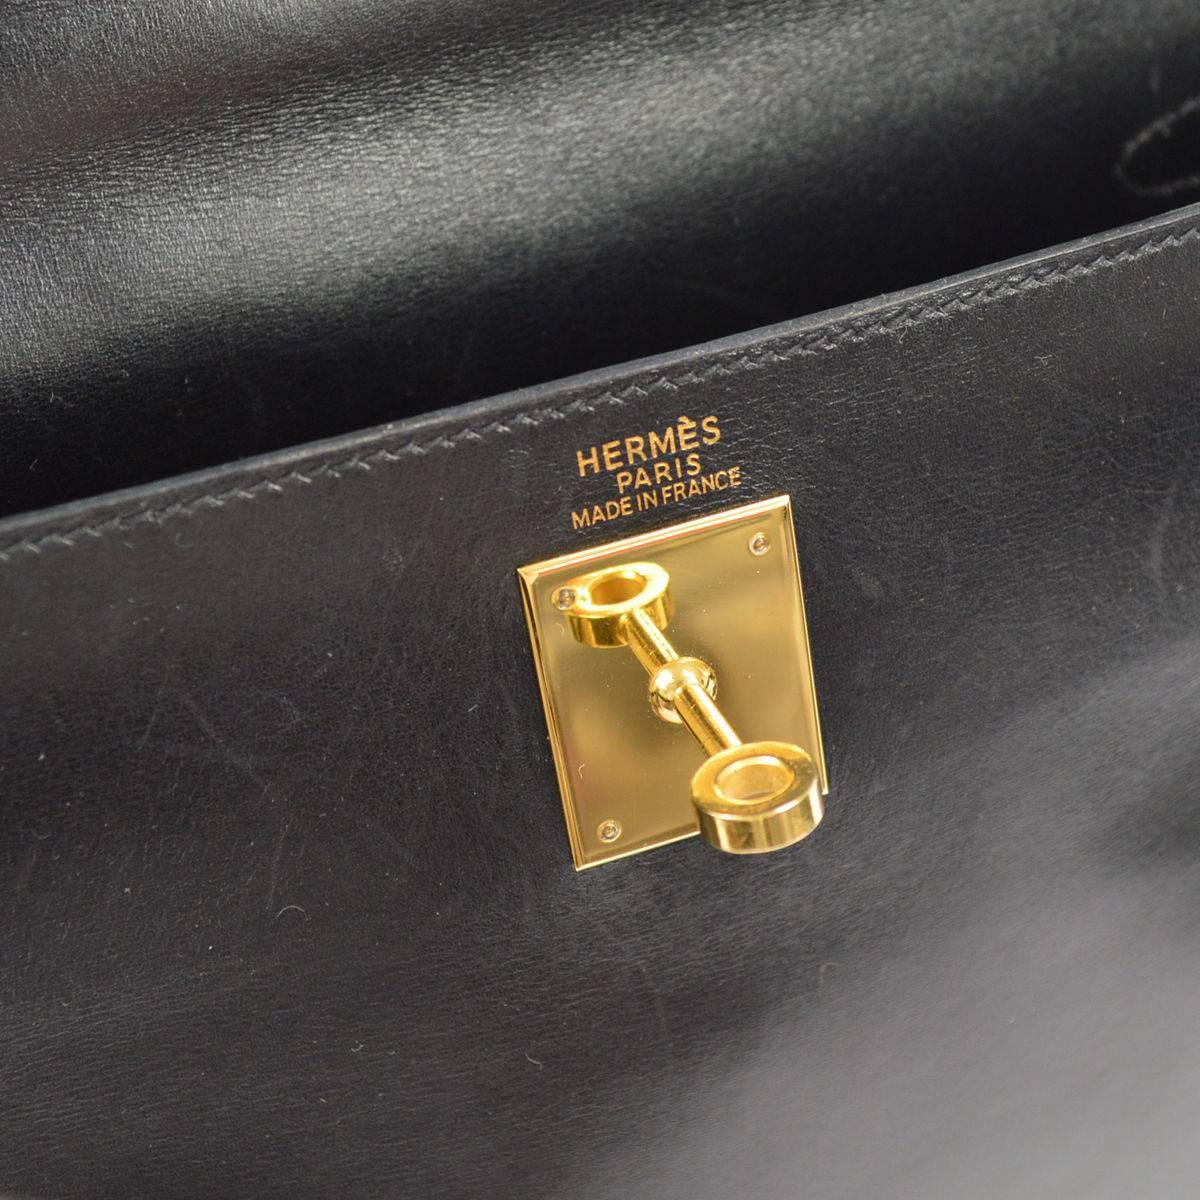 CURATOR'S NOTES

Hermes Vintage Black Leather Gold Kelly 32 Top Handle Satchel Bag in Dust Bag  

Calfskin leather
Gold tone hardware
Turnlock closure
Made in France
Date code Square B
Handle drop 4